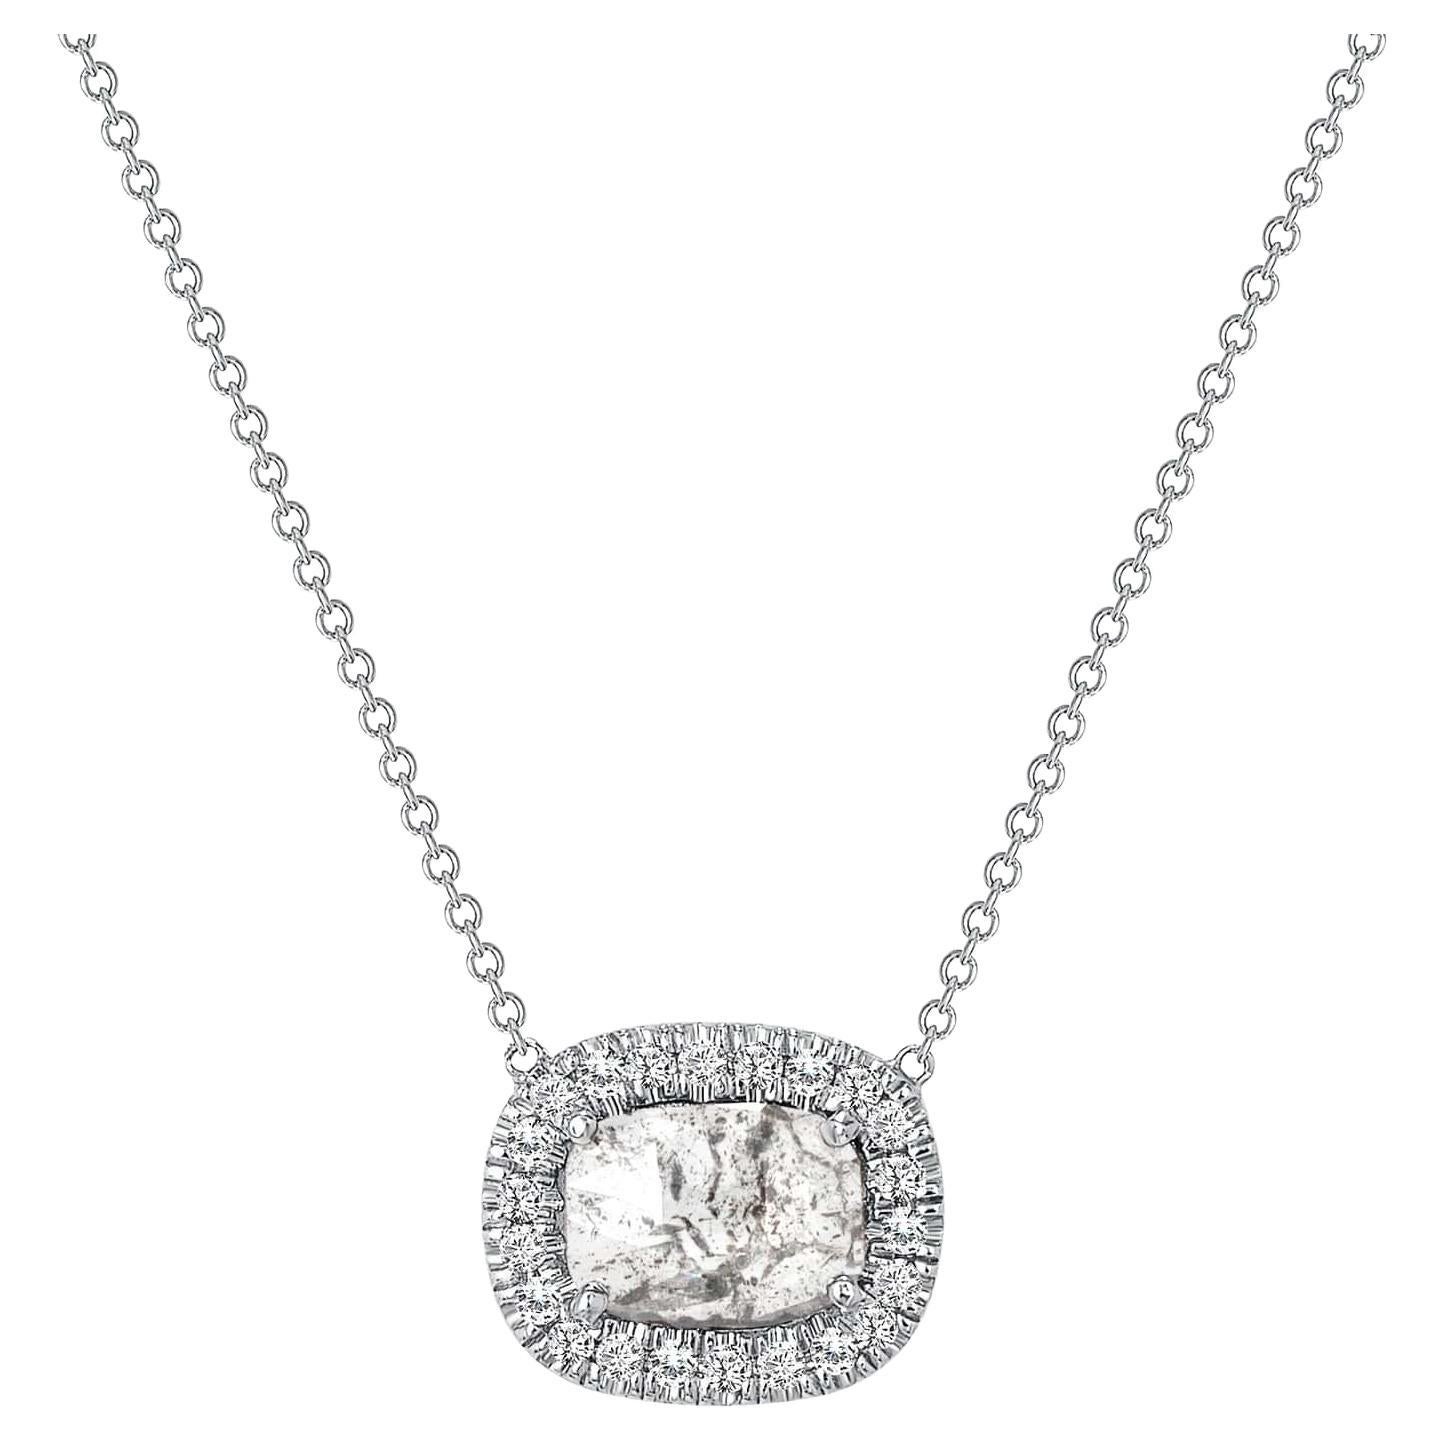 This Diamond Halo Pendant features a Cushion-cut Diamond center stone accompanied by small Round Diamond side stones in Halo setting in 14k Gold metal. Great gift for Anniversary, Birthday, Wedding, and Holiday.

Necklace Information
Metal : 14k